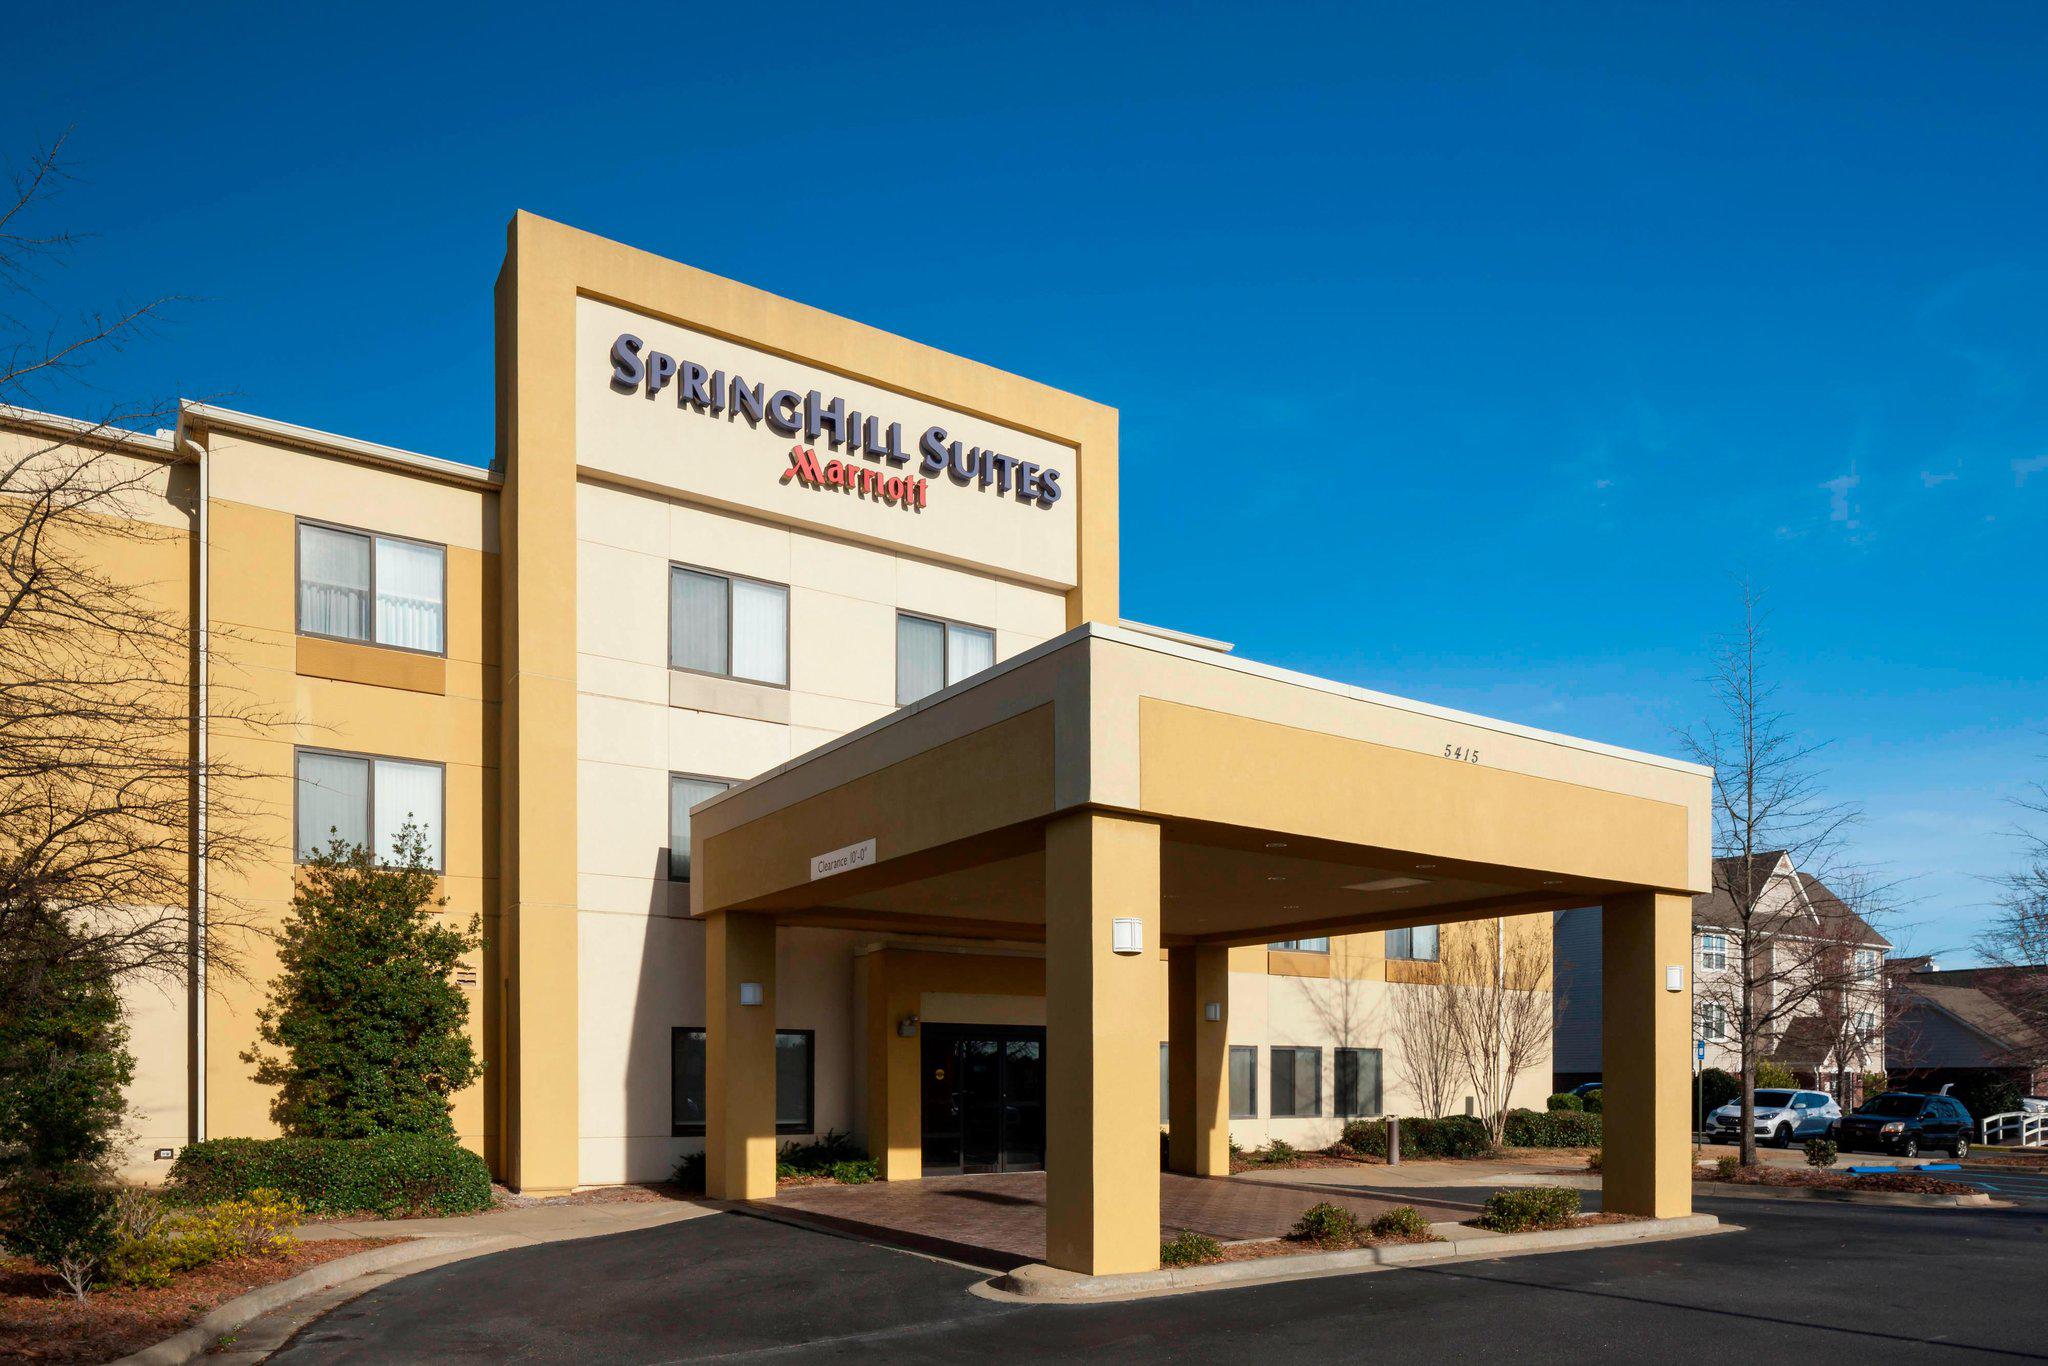 SpringHill Suites by Marriott Columbus Photo